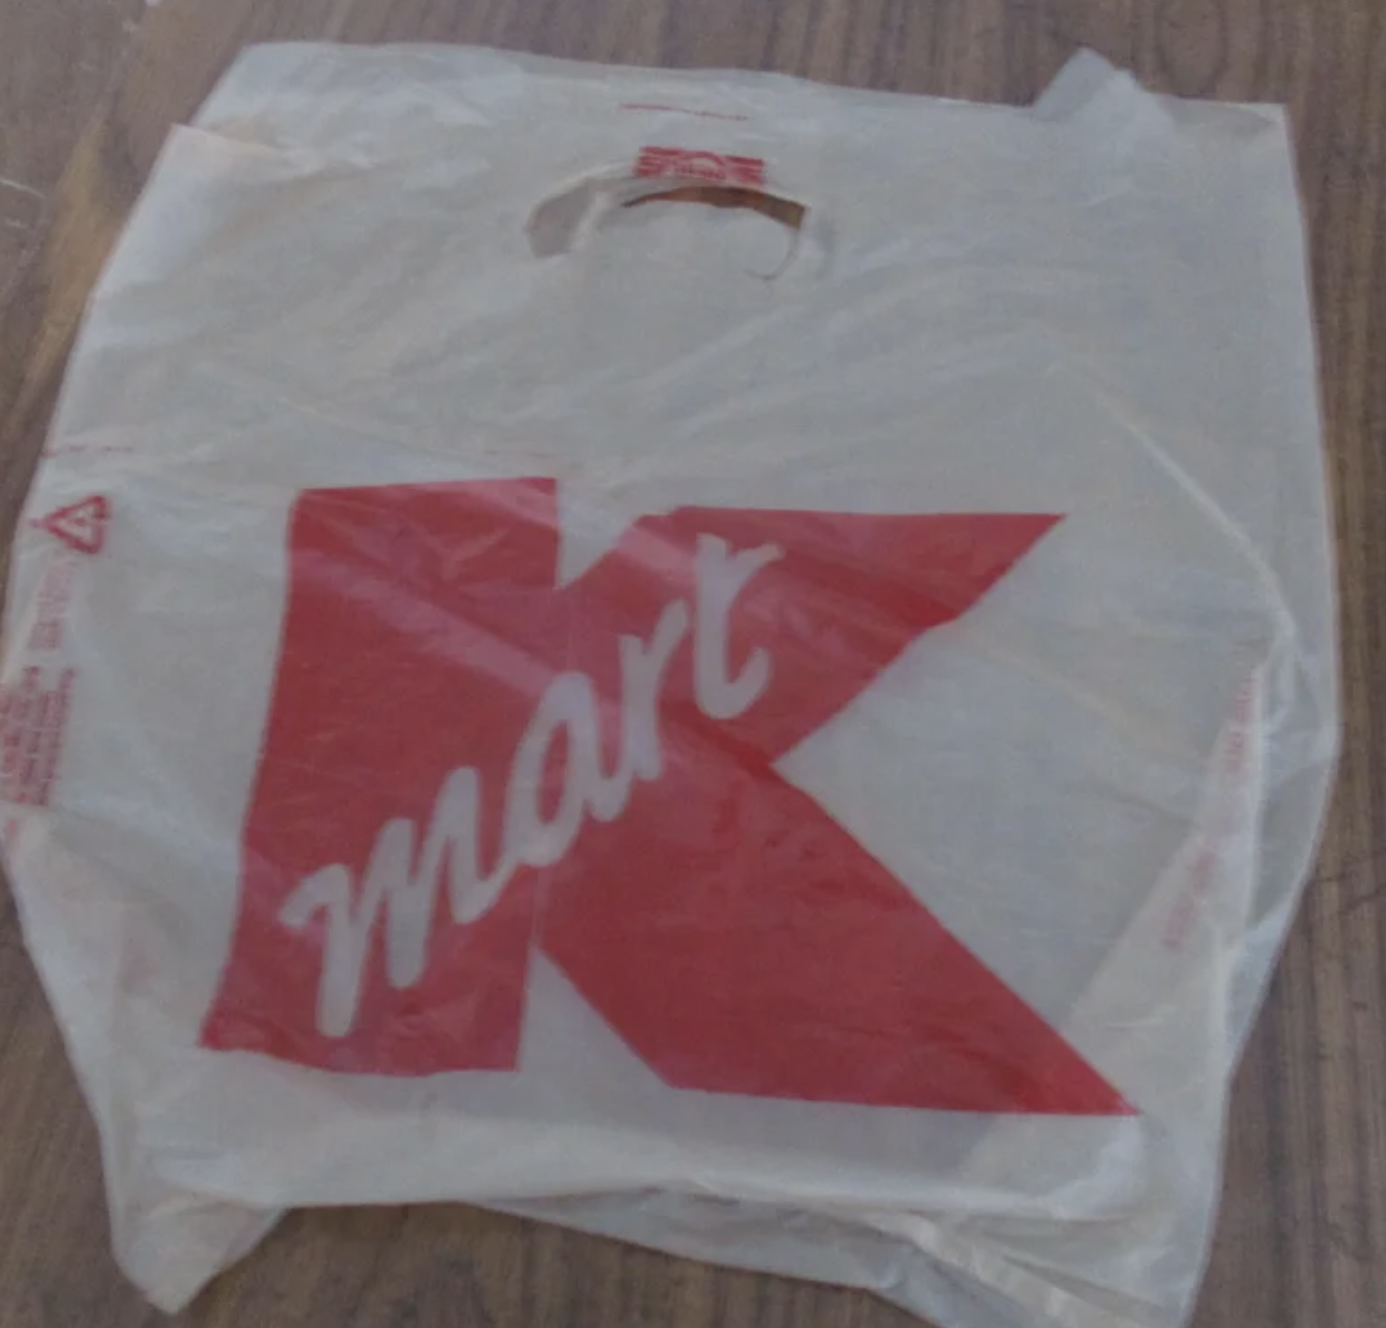 22 Things Walmart, Target, And Kmart Had Growing Up That You 100